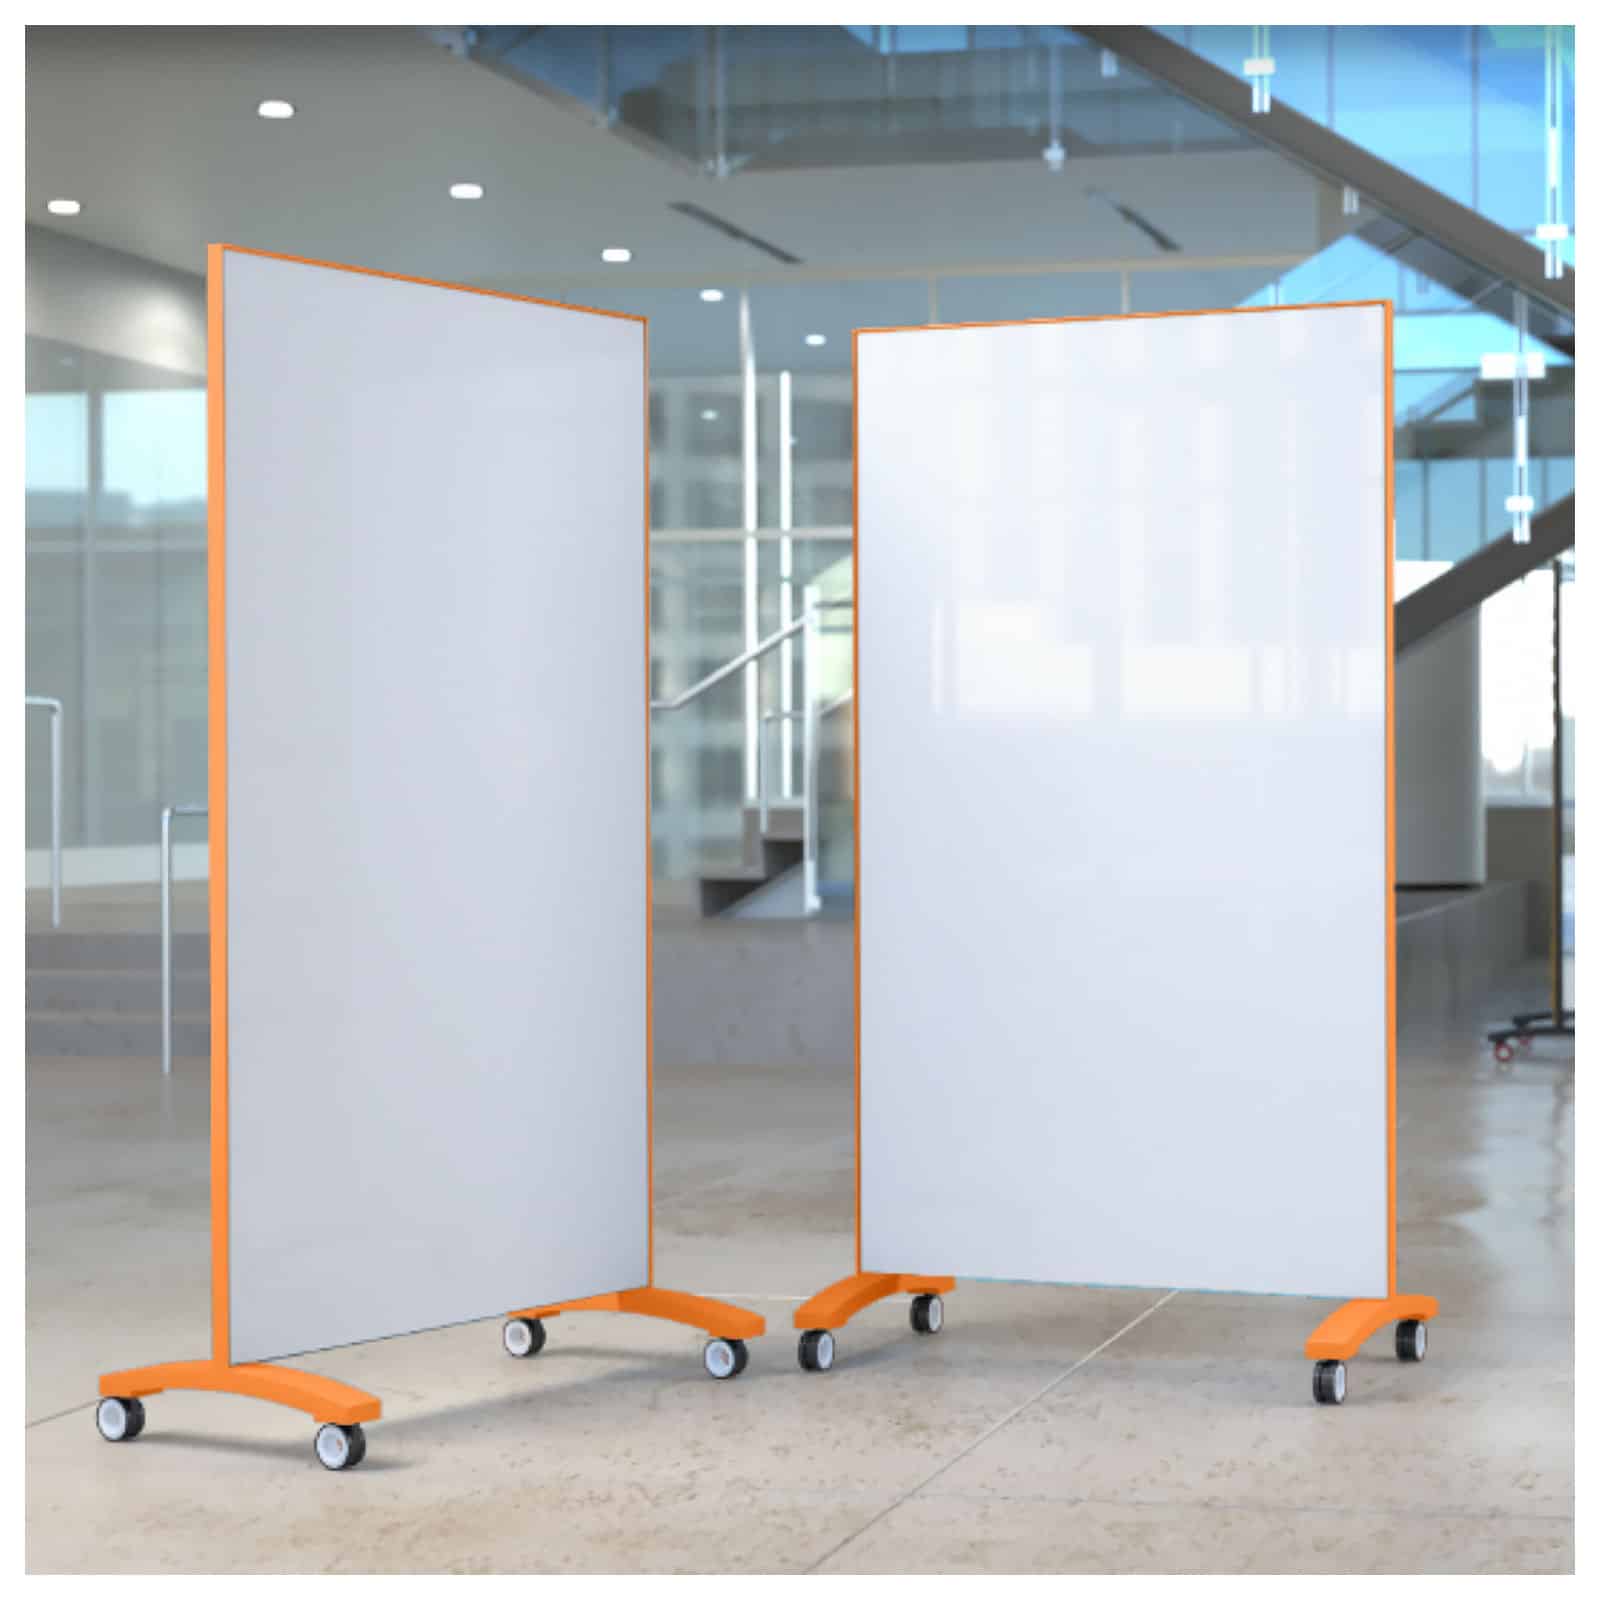 Scale 1:1 Marc Mobile Marker Board with orange frame finish